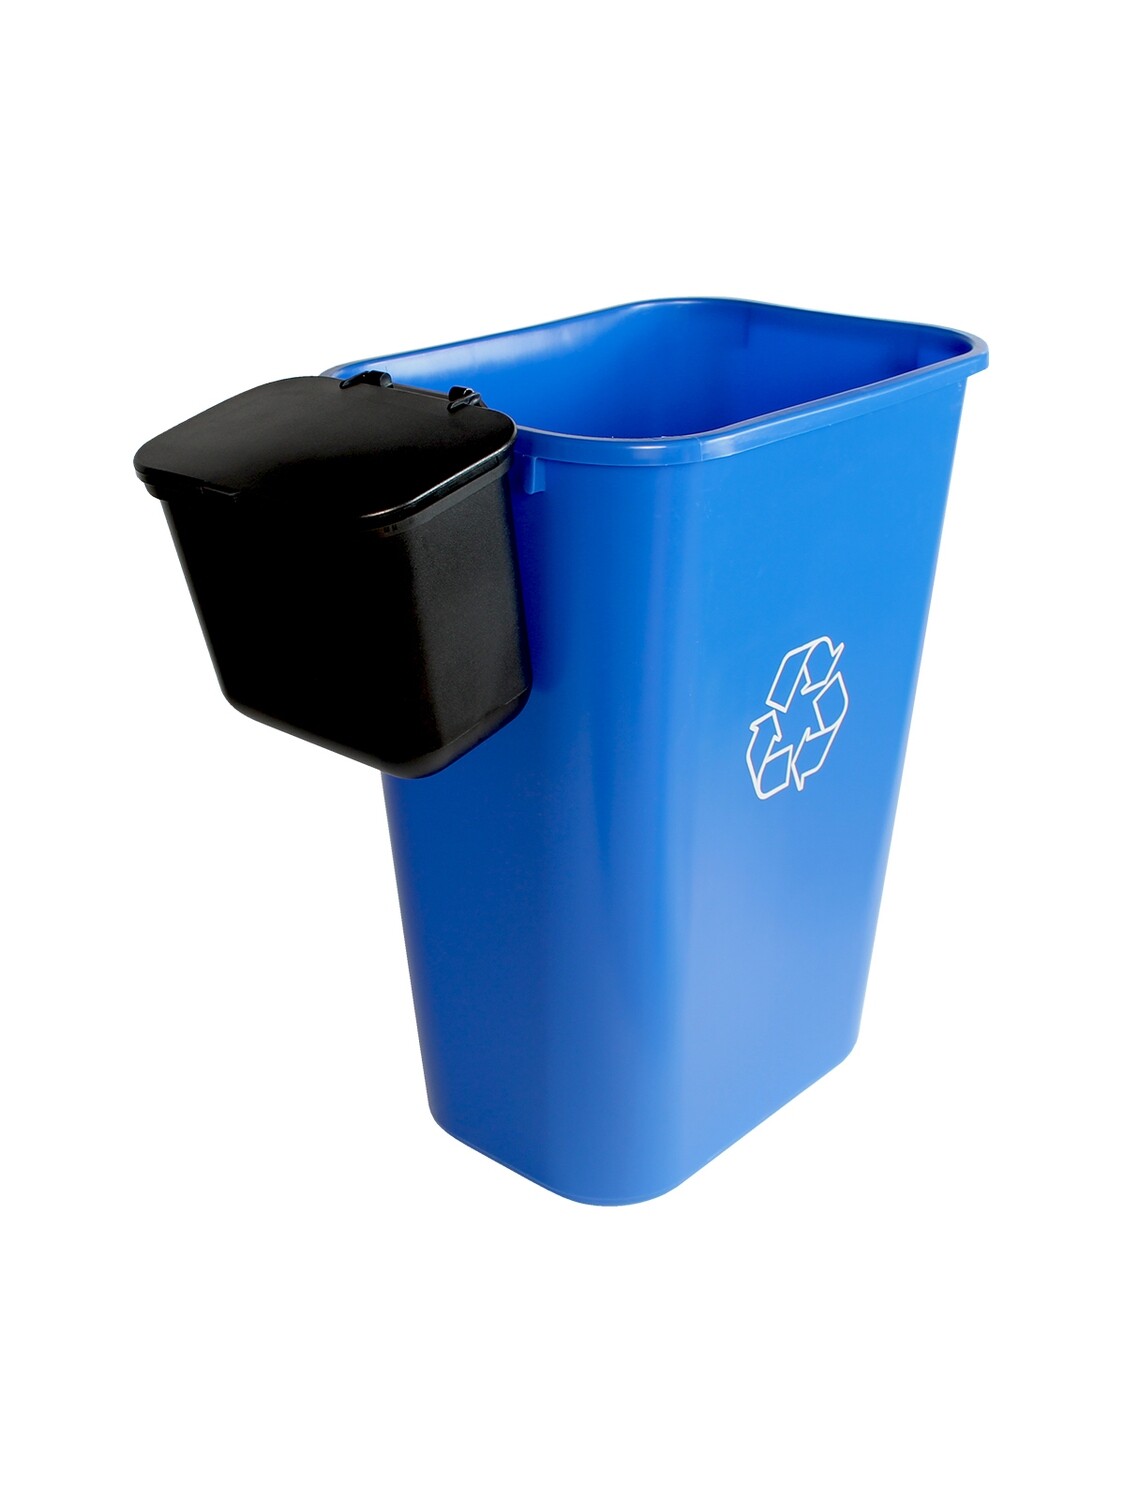 Deskside 10G Recycling Container with Hanging Waste Basket